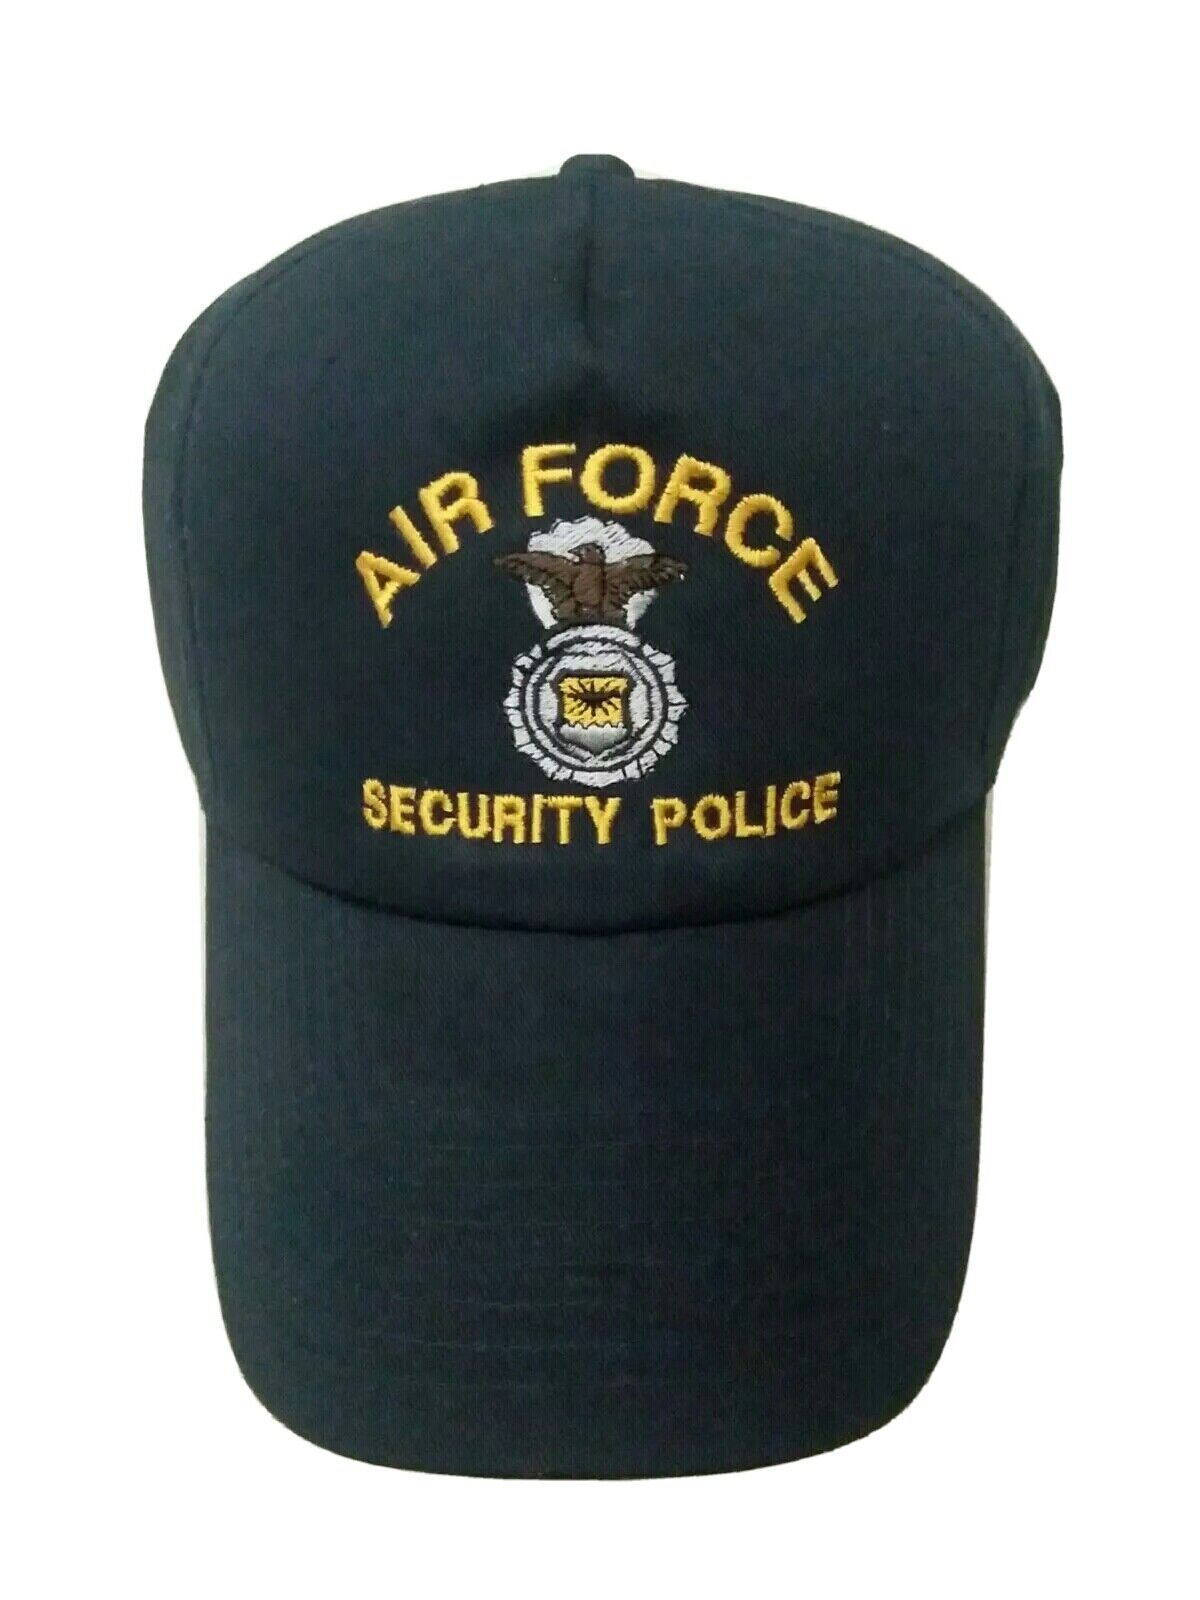 Security Police Dark Blue Cap New US Air Force 5 Panel SnapBack Embroidered Hat 